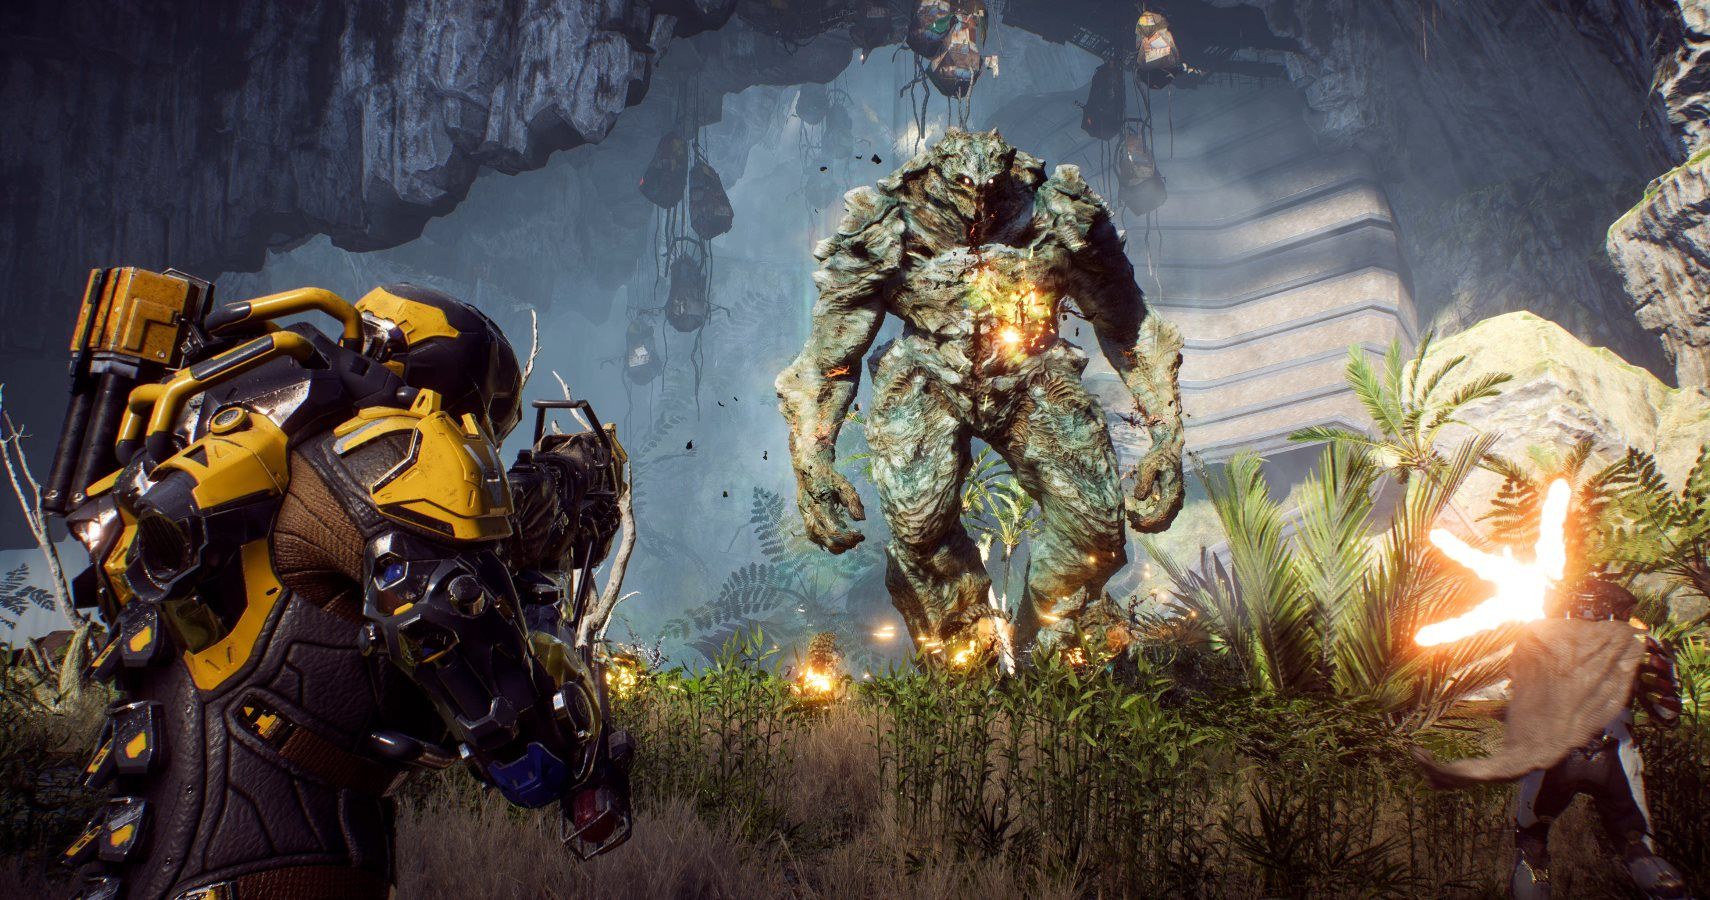 BioWare Says Anthem Was In Development Before Destiny Came Out - But That Doesn't Mean It Wasn't An Influence